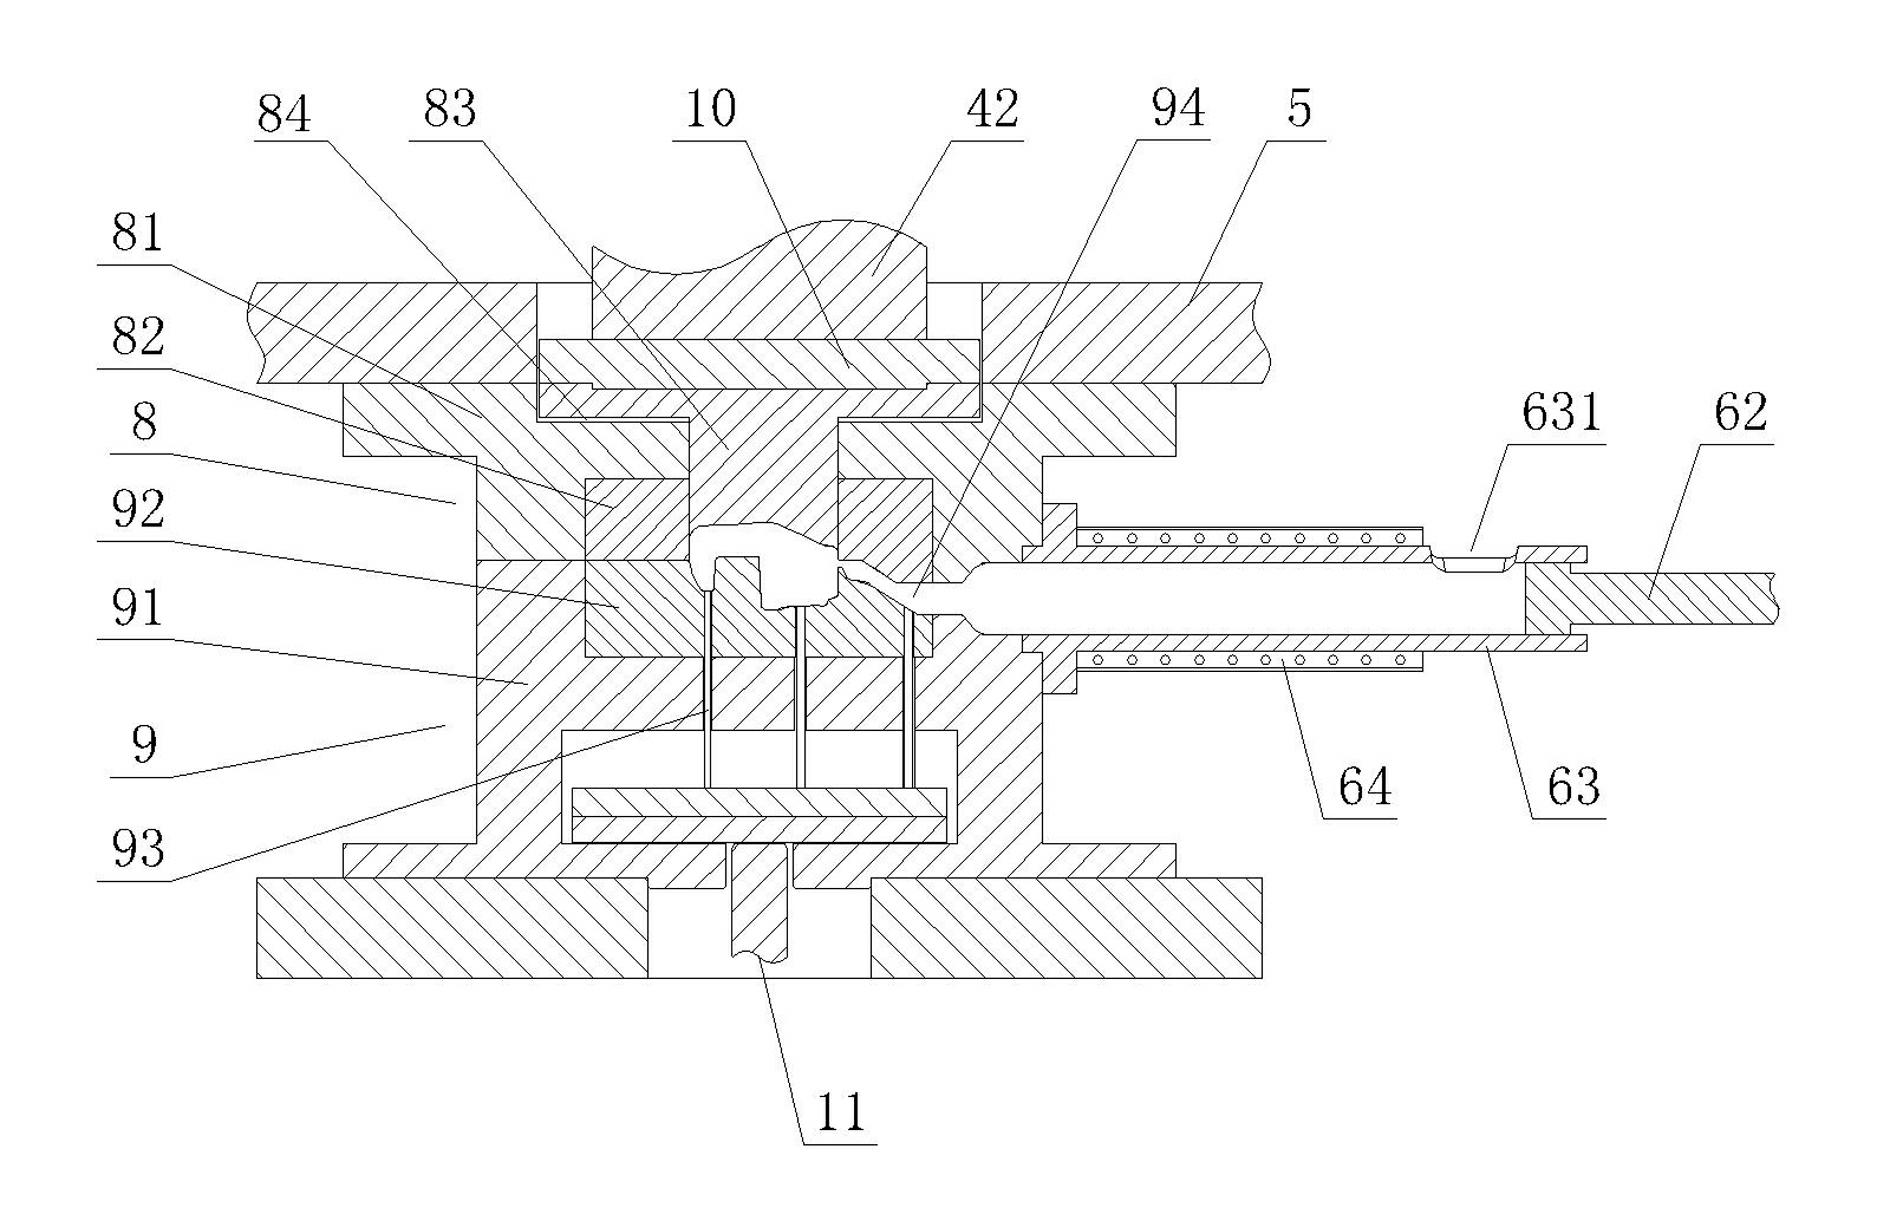 Casting-forging hydropress and method for casting and forging product thereof